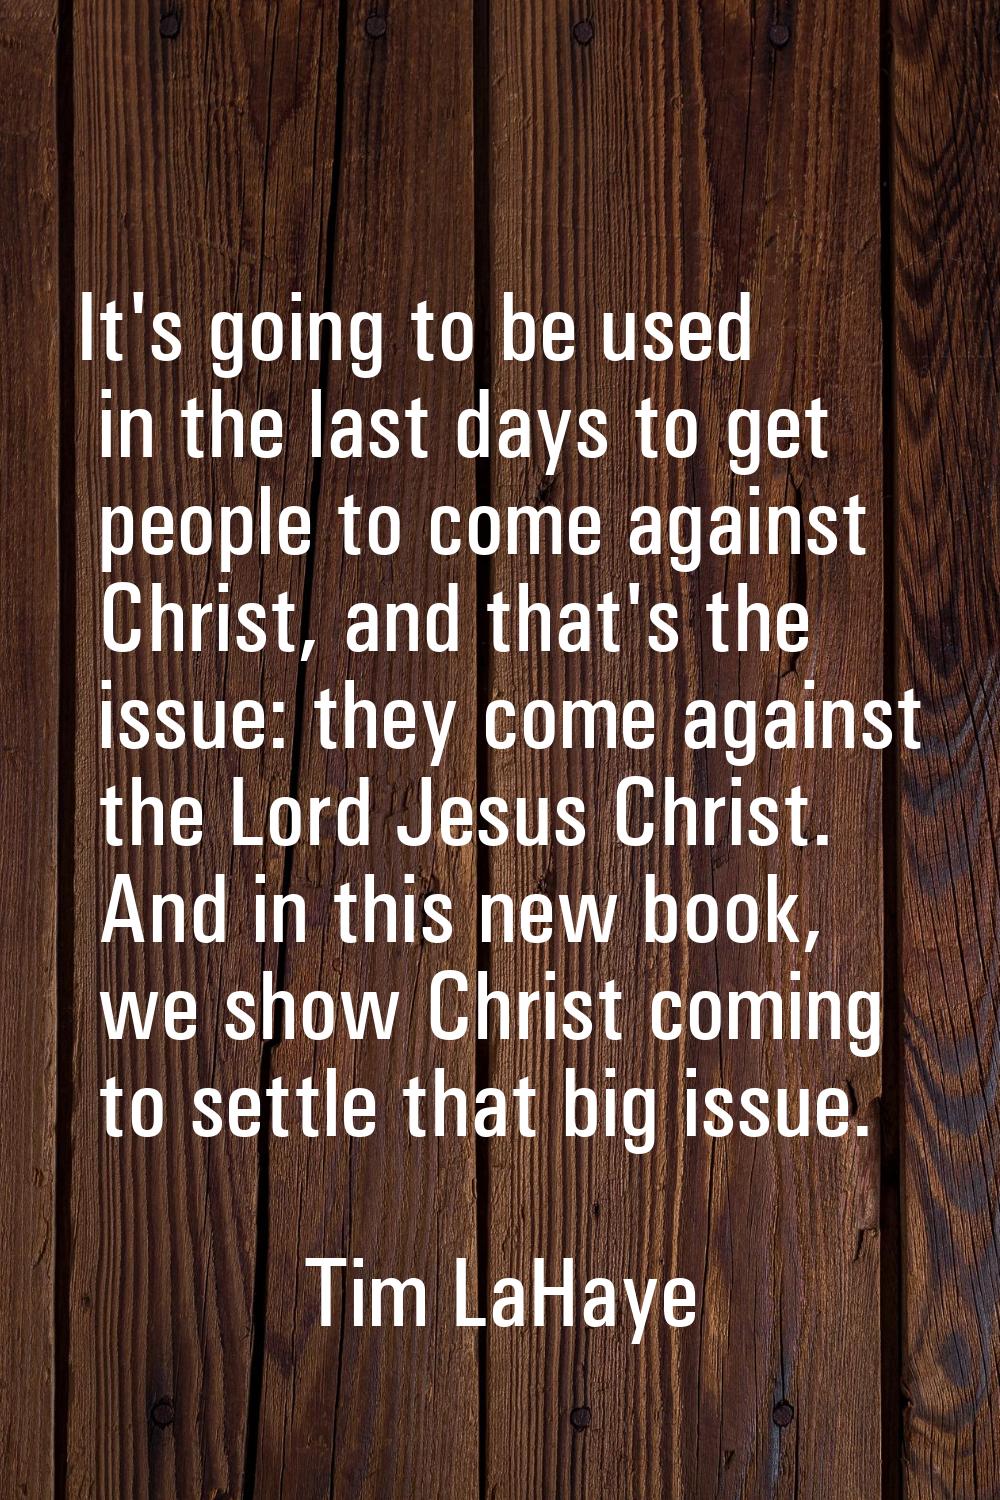 It's going to be used in the last days to get people to come against Christ, and that's the issue: 